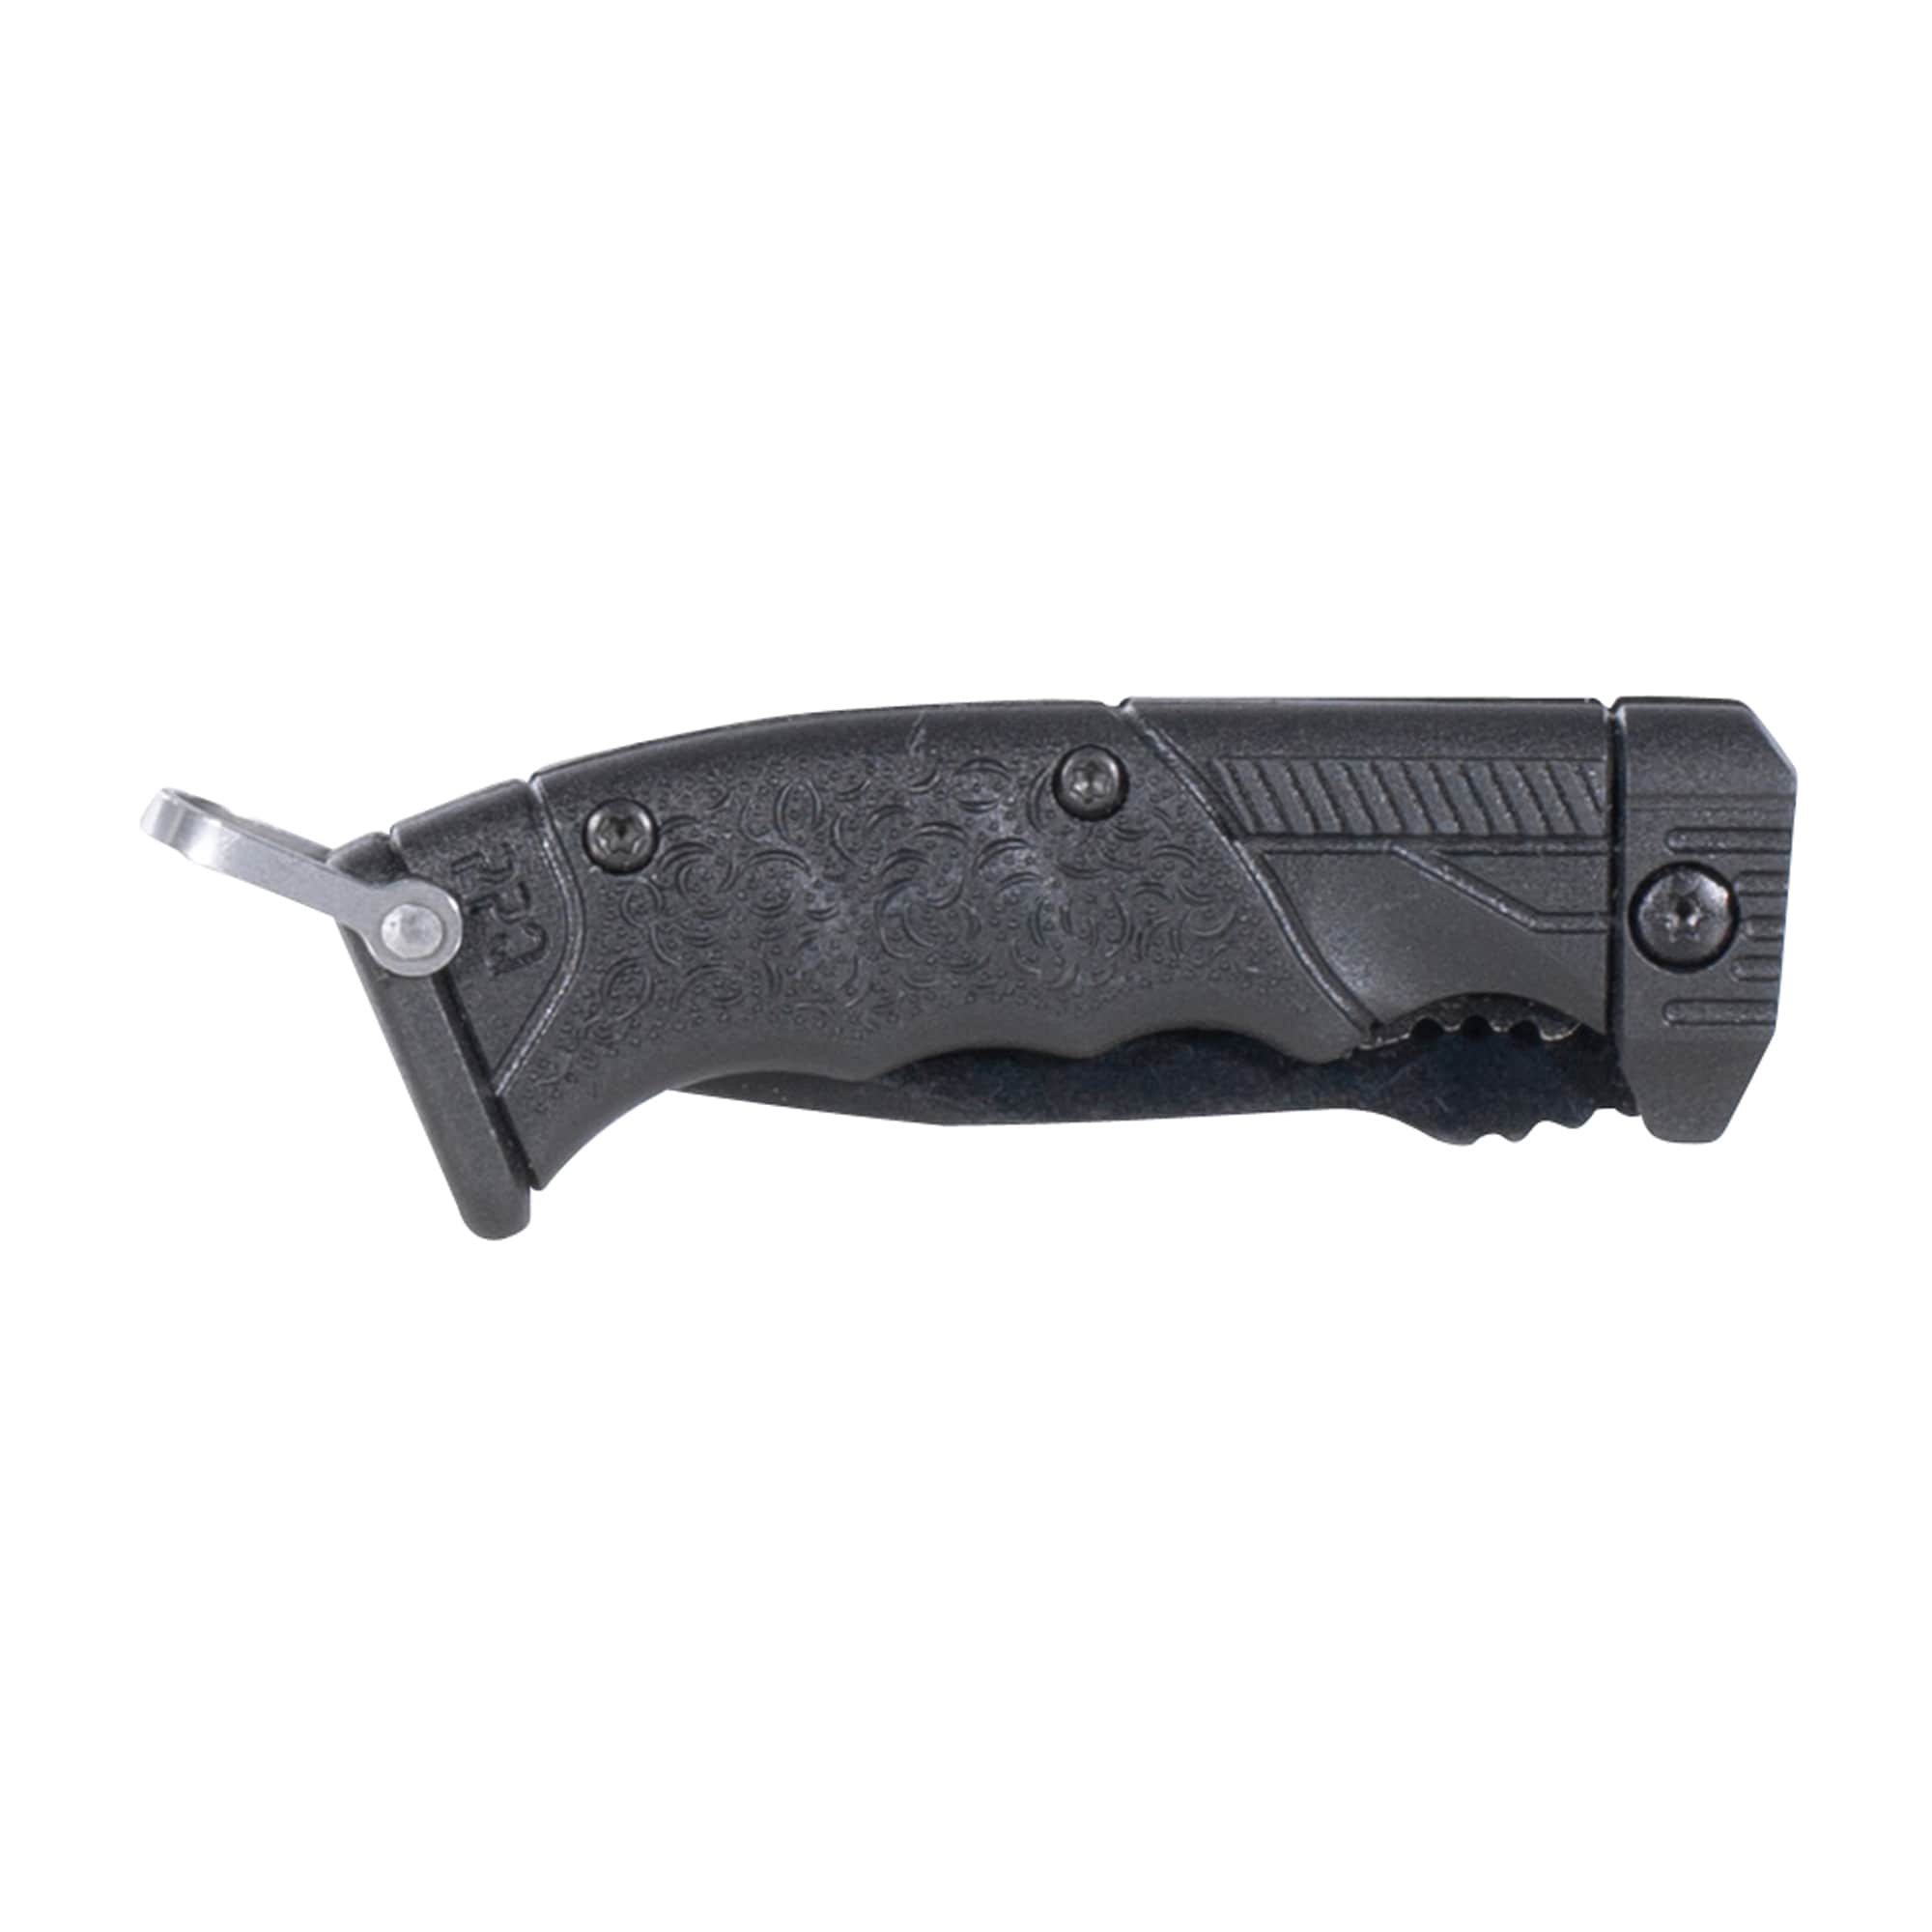 Purchase the Pocket Knife Walther Micro PPQ by ASMC